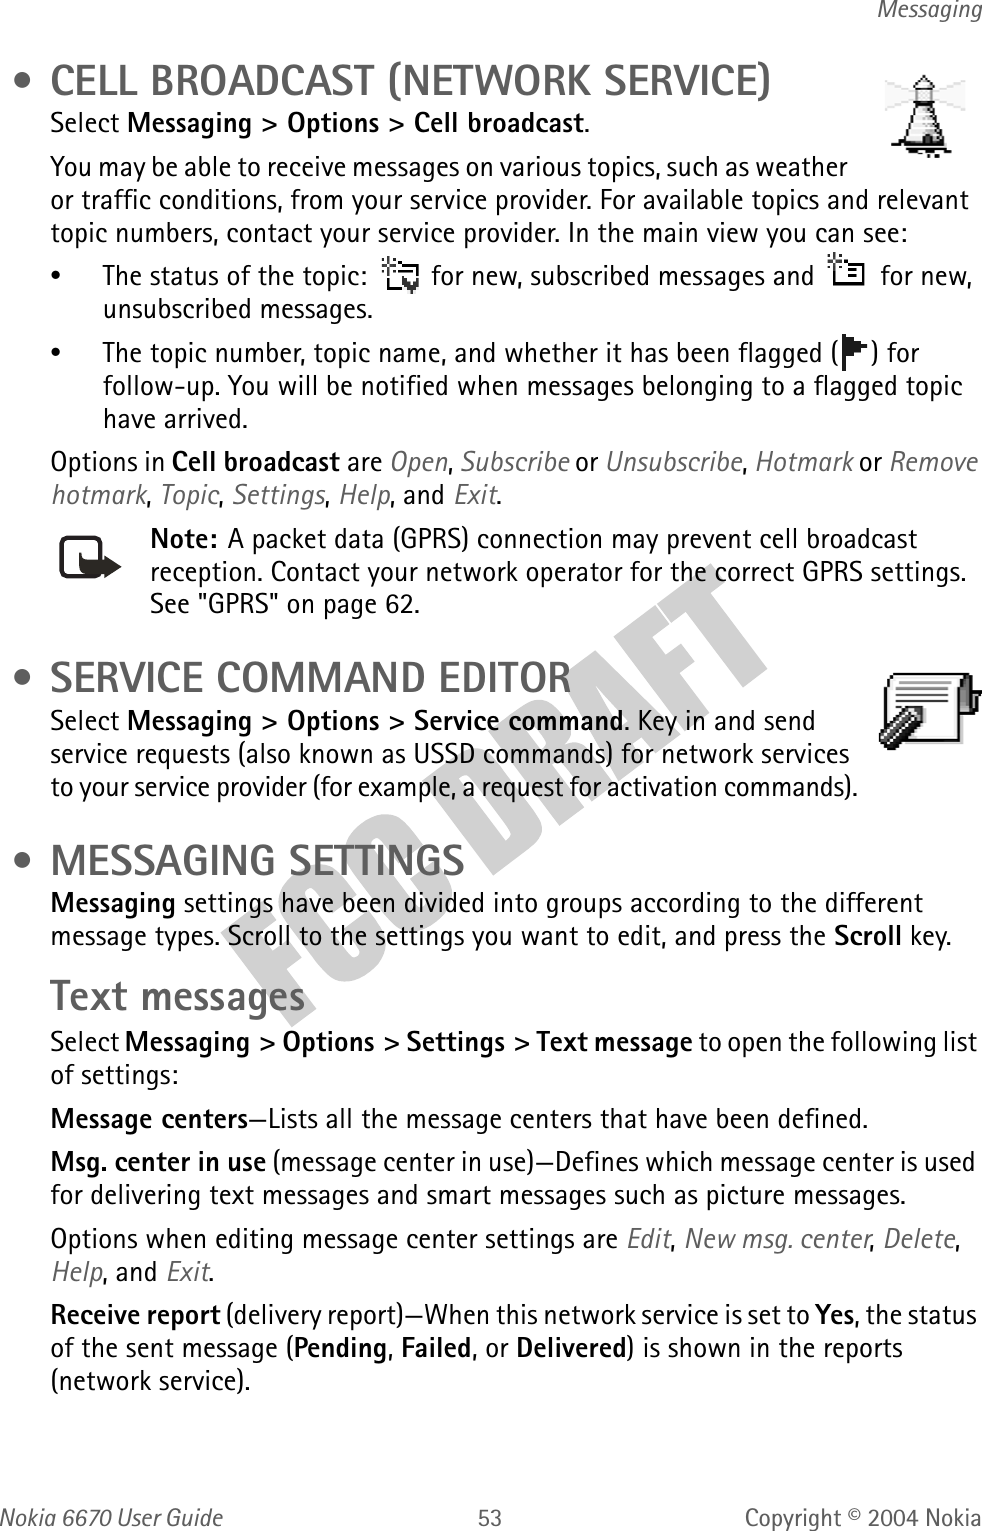 Nokia  User GuideCopyright © 2004 NokiaMessaging • CELL BROADCAST (NETWORK SERVICE)Select Messaging &gt; Options &gt; Cell broadcast.You may be able to receive messages on various topics, such as weather or traffic conditions, from your service provider. For available topics and relevant topic numbers, contact your service provider. In the main view you can see:•The status of the topic:   for new, subscribed messages and   for new, unsubscribed messages.•The topic number, topic name, and whether it has been flagged ( ) for follow-up. You will be notified when messages belonging to a flagged topic have arrived.Options in Cell broadcast are Open, Subscribe or Unsubscribe, Hotmark or Remove hotmark, Topic, Settings, Help, and Exit.Note: A packet data (GPRS) connection may prevent cell broadcast reception. Contact your network operator for the correct GPRS settings. See &quot;GPRS&quot; on page 62.  • SERVICE COMMAND EDITORSelect Messaging &gt; Options &gt; Service command. Key in and send service requests (also known as USSD commands) for network services to your service provider (for example, a request for activation commands). • MESSAGING SETTINGSMessaging settings have been divided into groups according to the different message types. Scroll to the settings you want to edit, and press the Scroll key.Text messagesSelect Messaging &gt; Options &gt; Settings &gt; Text message to open the following list of settings:Message centers—Lists all the message centers that have been defined.Msg. center in use (message center in use)—Defines which message center is used for delivering text messages and smart messages such as picture messages.Options when editing message center settings are Edit, New msg. center, Delete, Help, and Exit.Receive report (delivery report)—When this network service is set to Yes, the status of the sent message (Pending, Failed, or Delivered) is shown in the reports (network service).